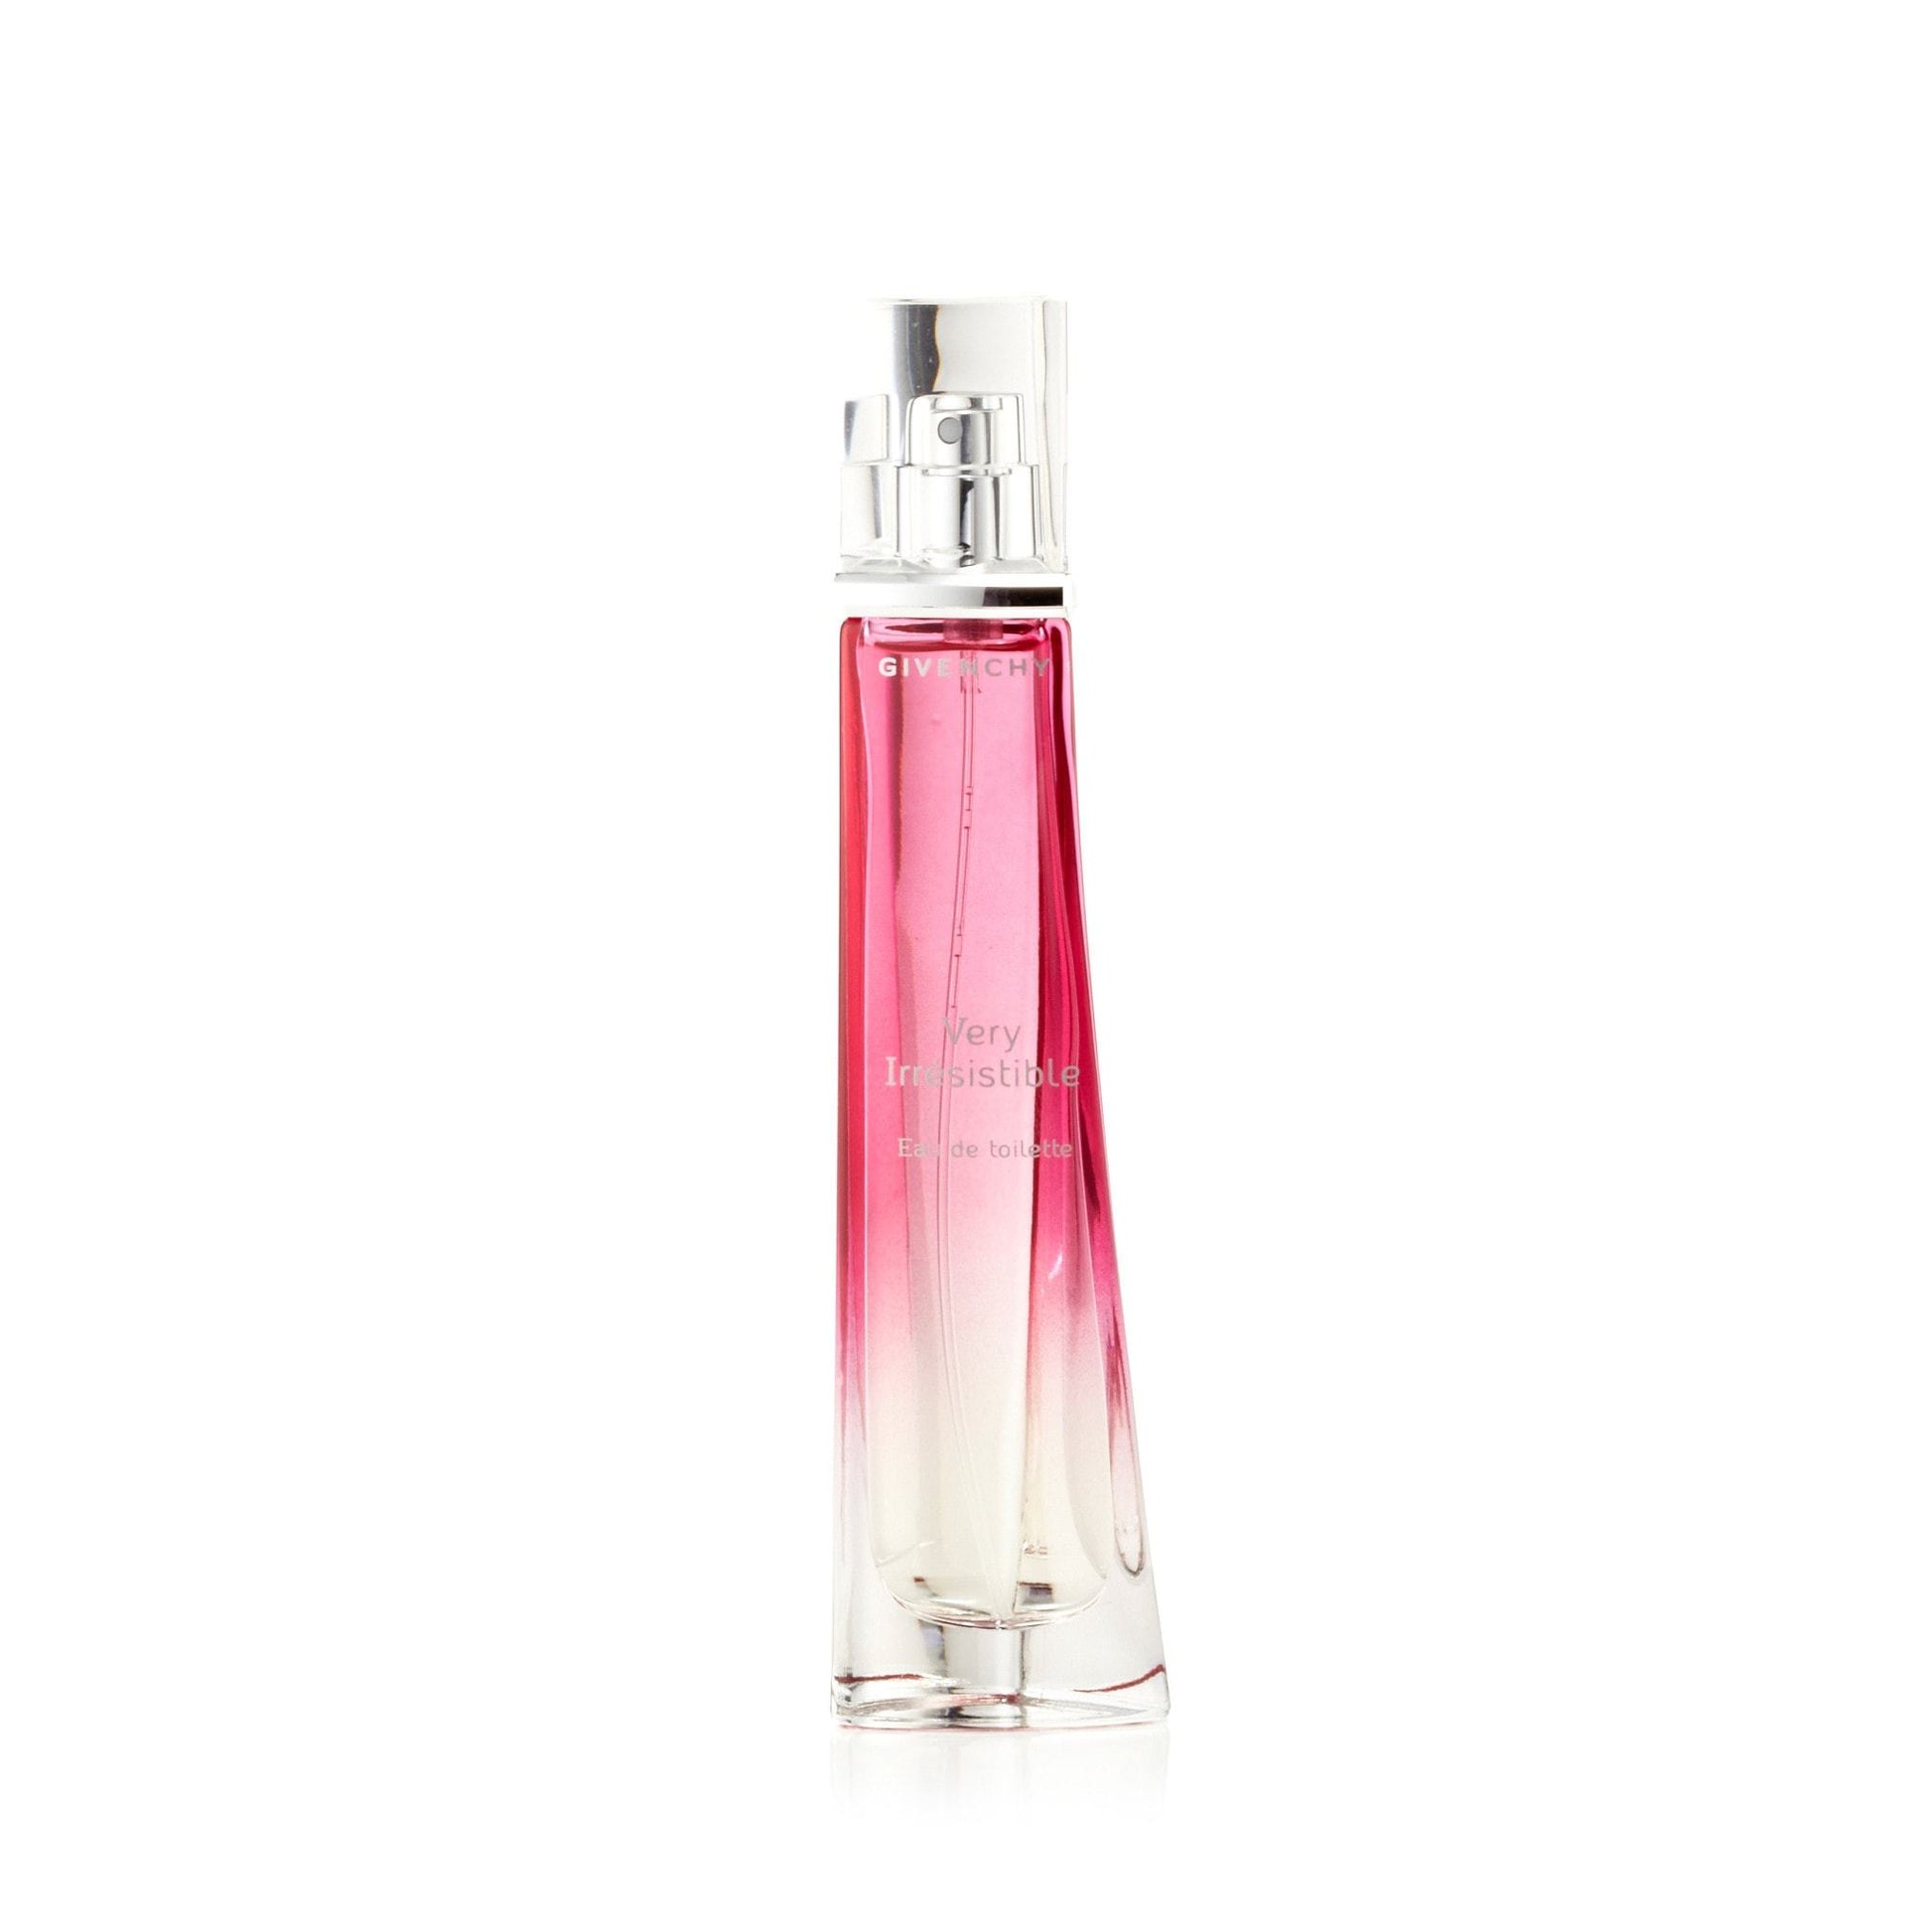 Very Irresistible Eau de Toilette Spray for Women by Givenchy, Product image 2